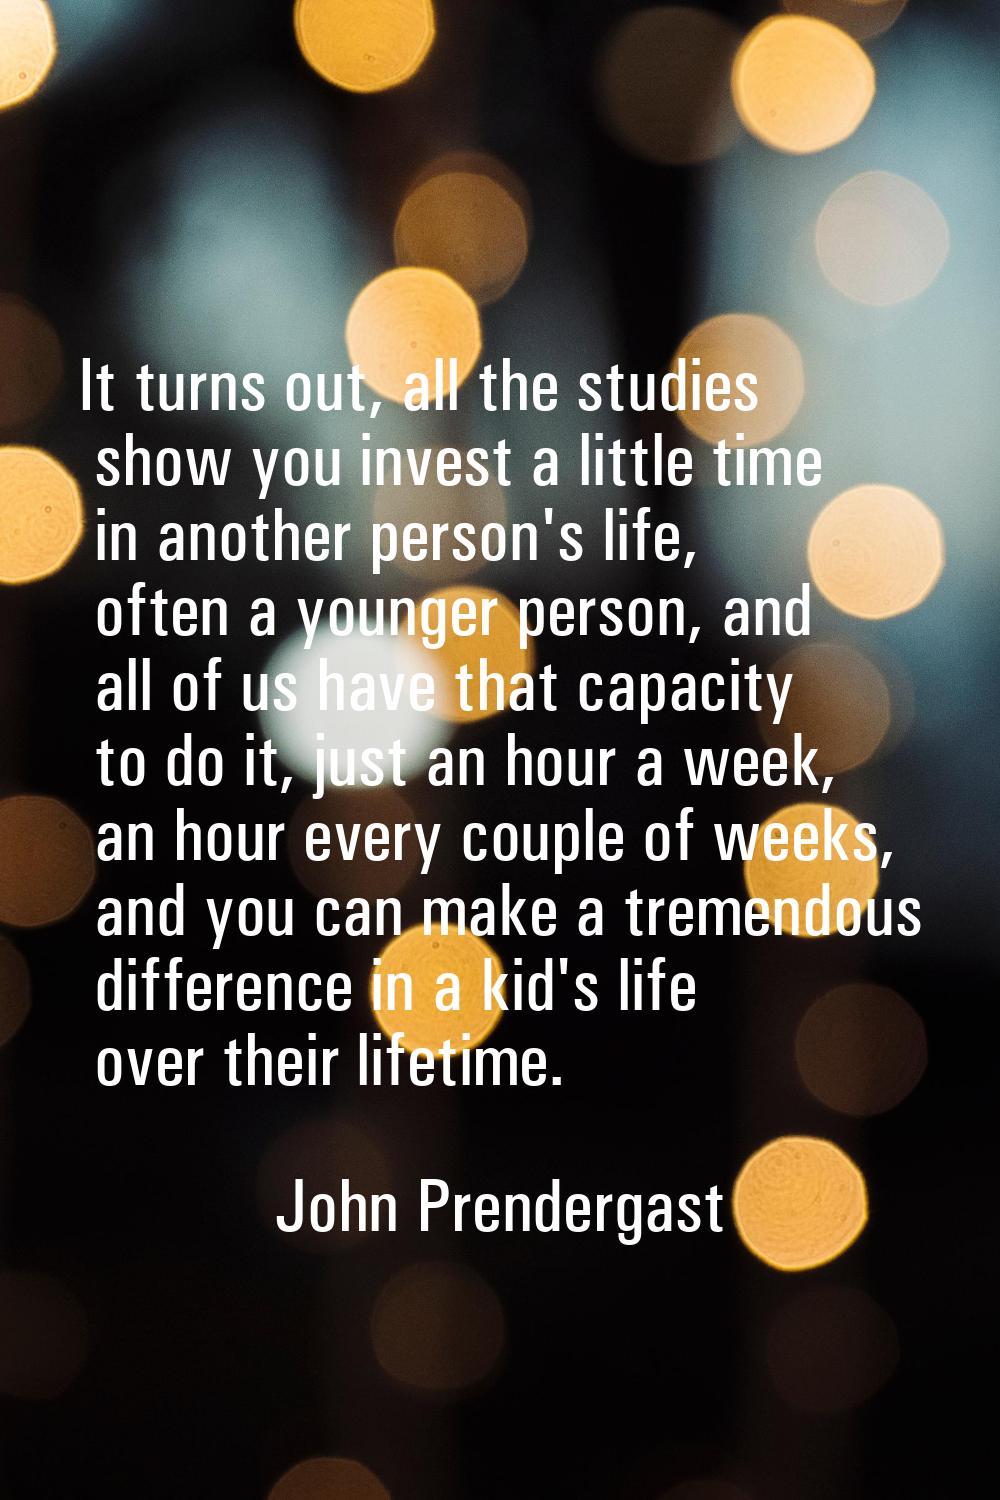 It turns out, all the studies show you invest a little time in another person's life, often a young